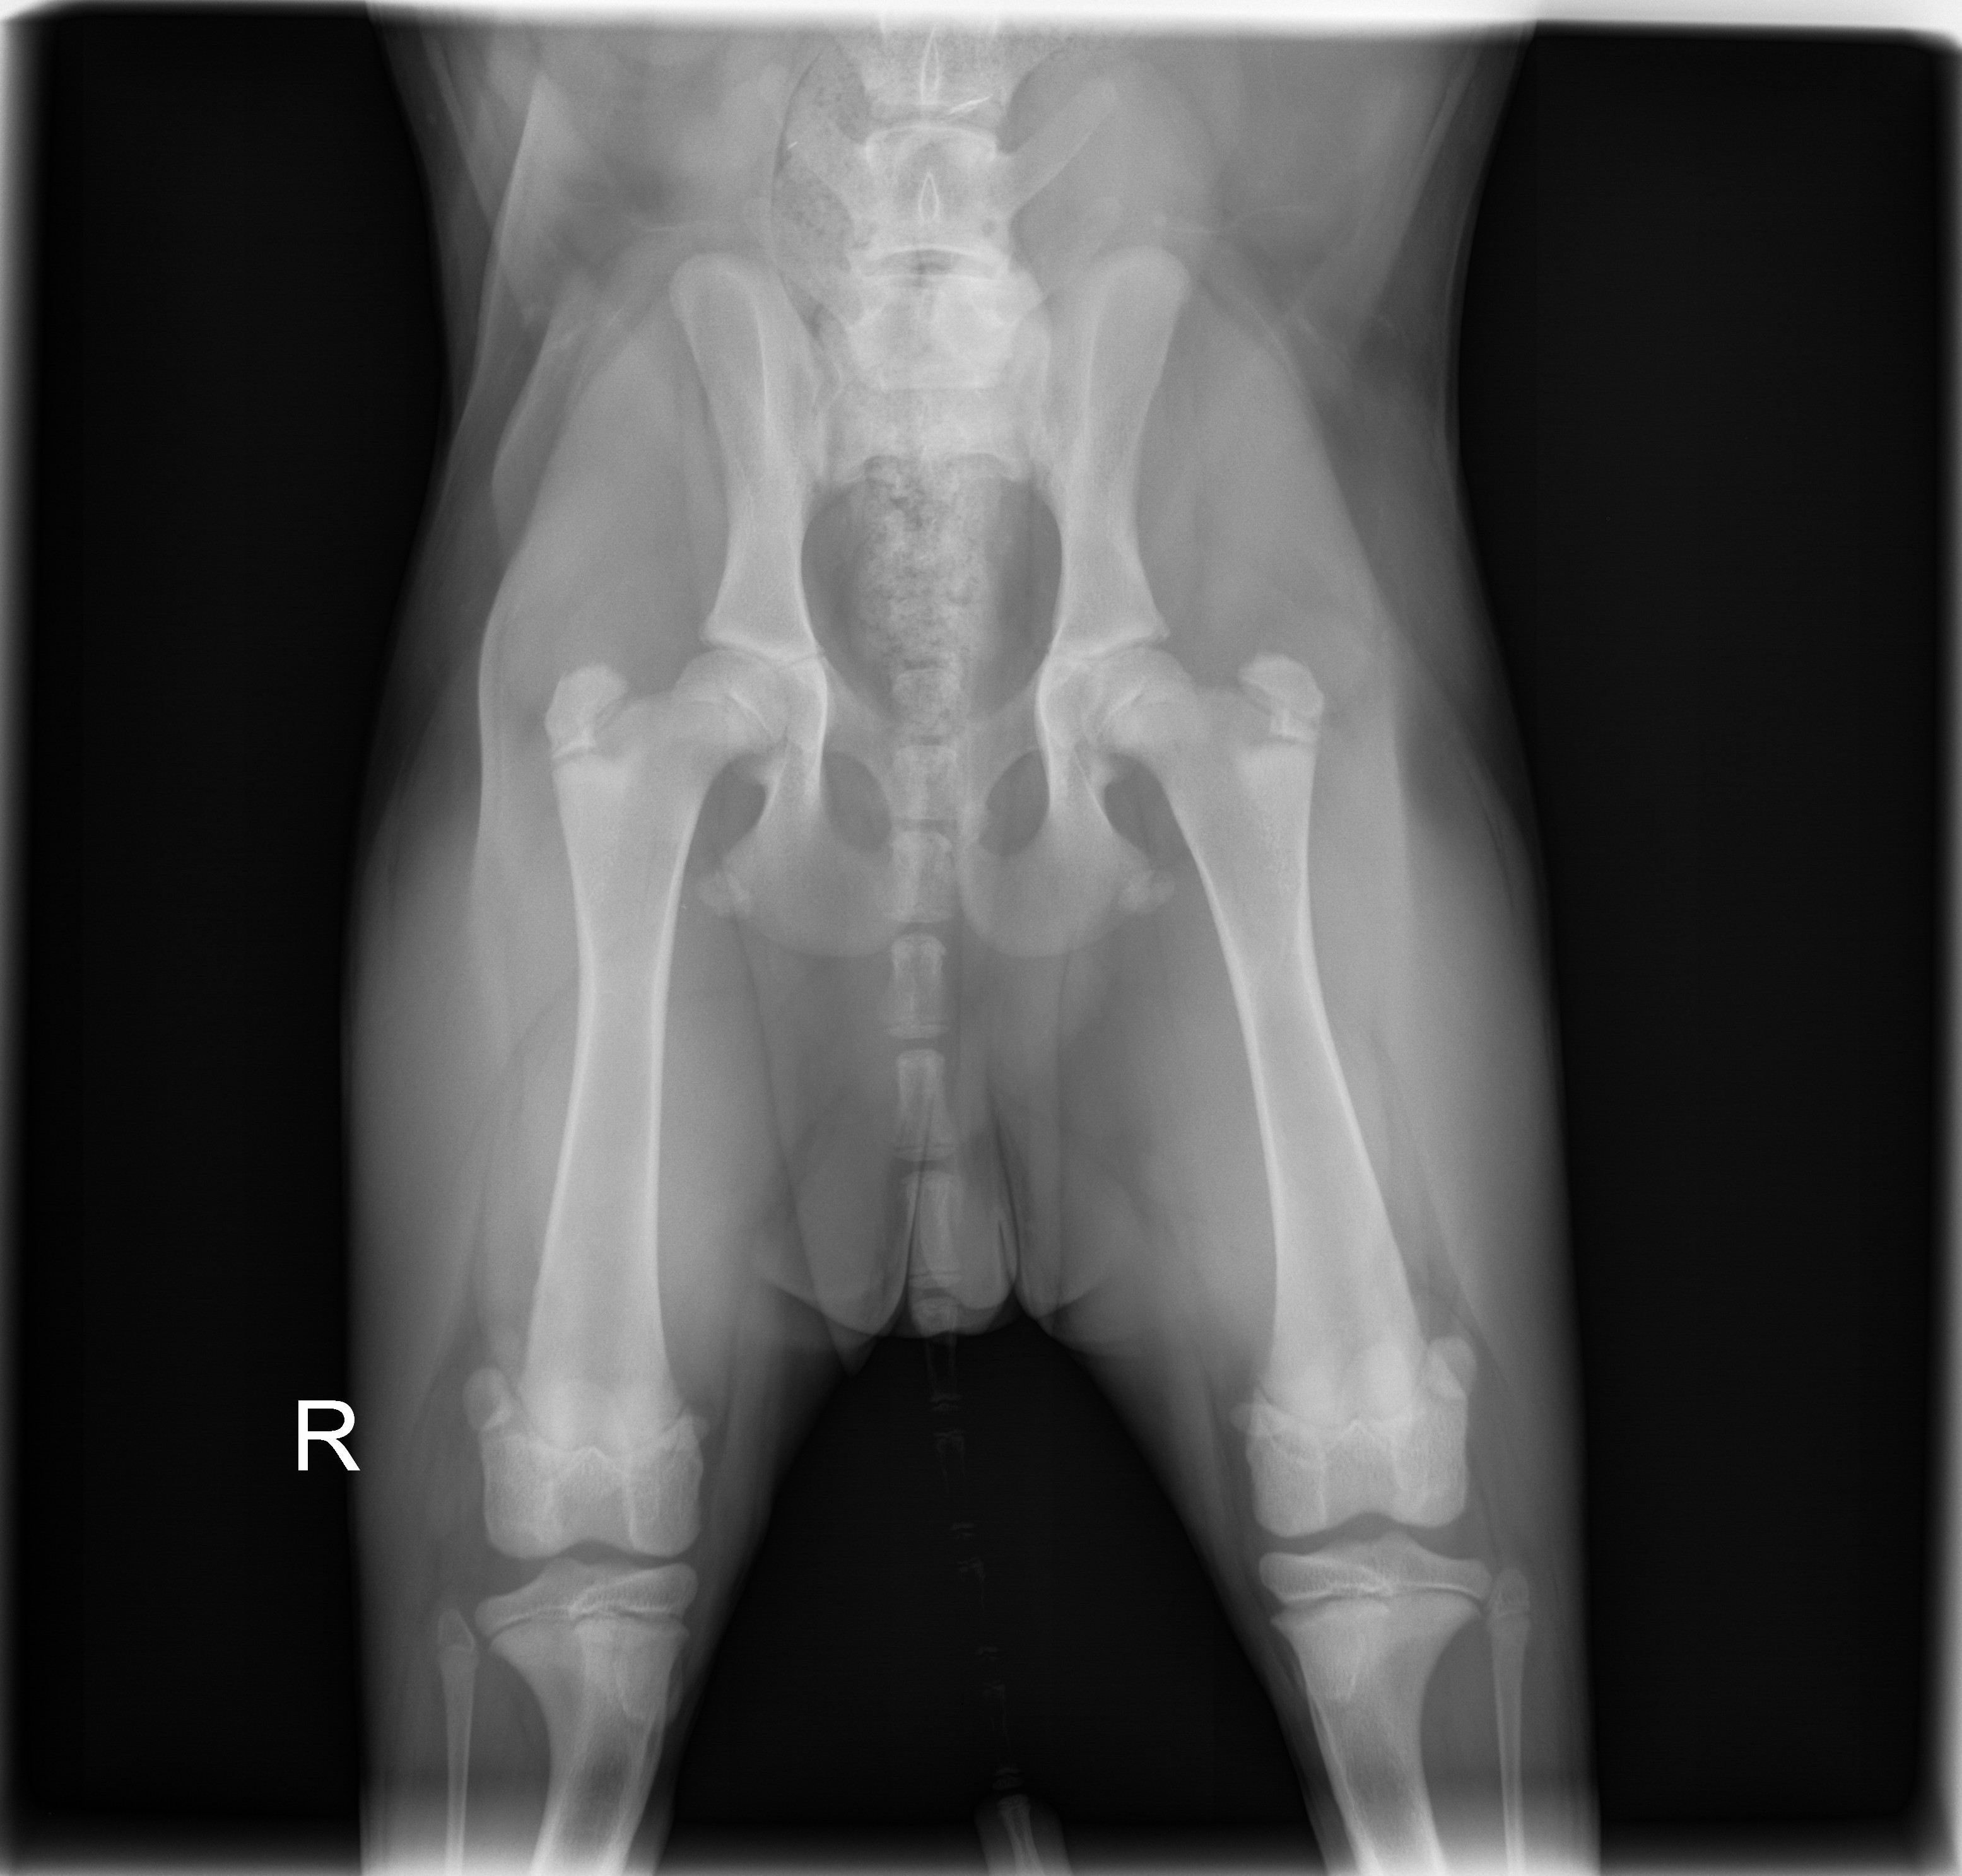 PennHip - Hip-extended radiograph view